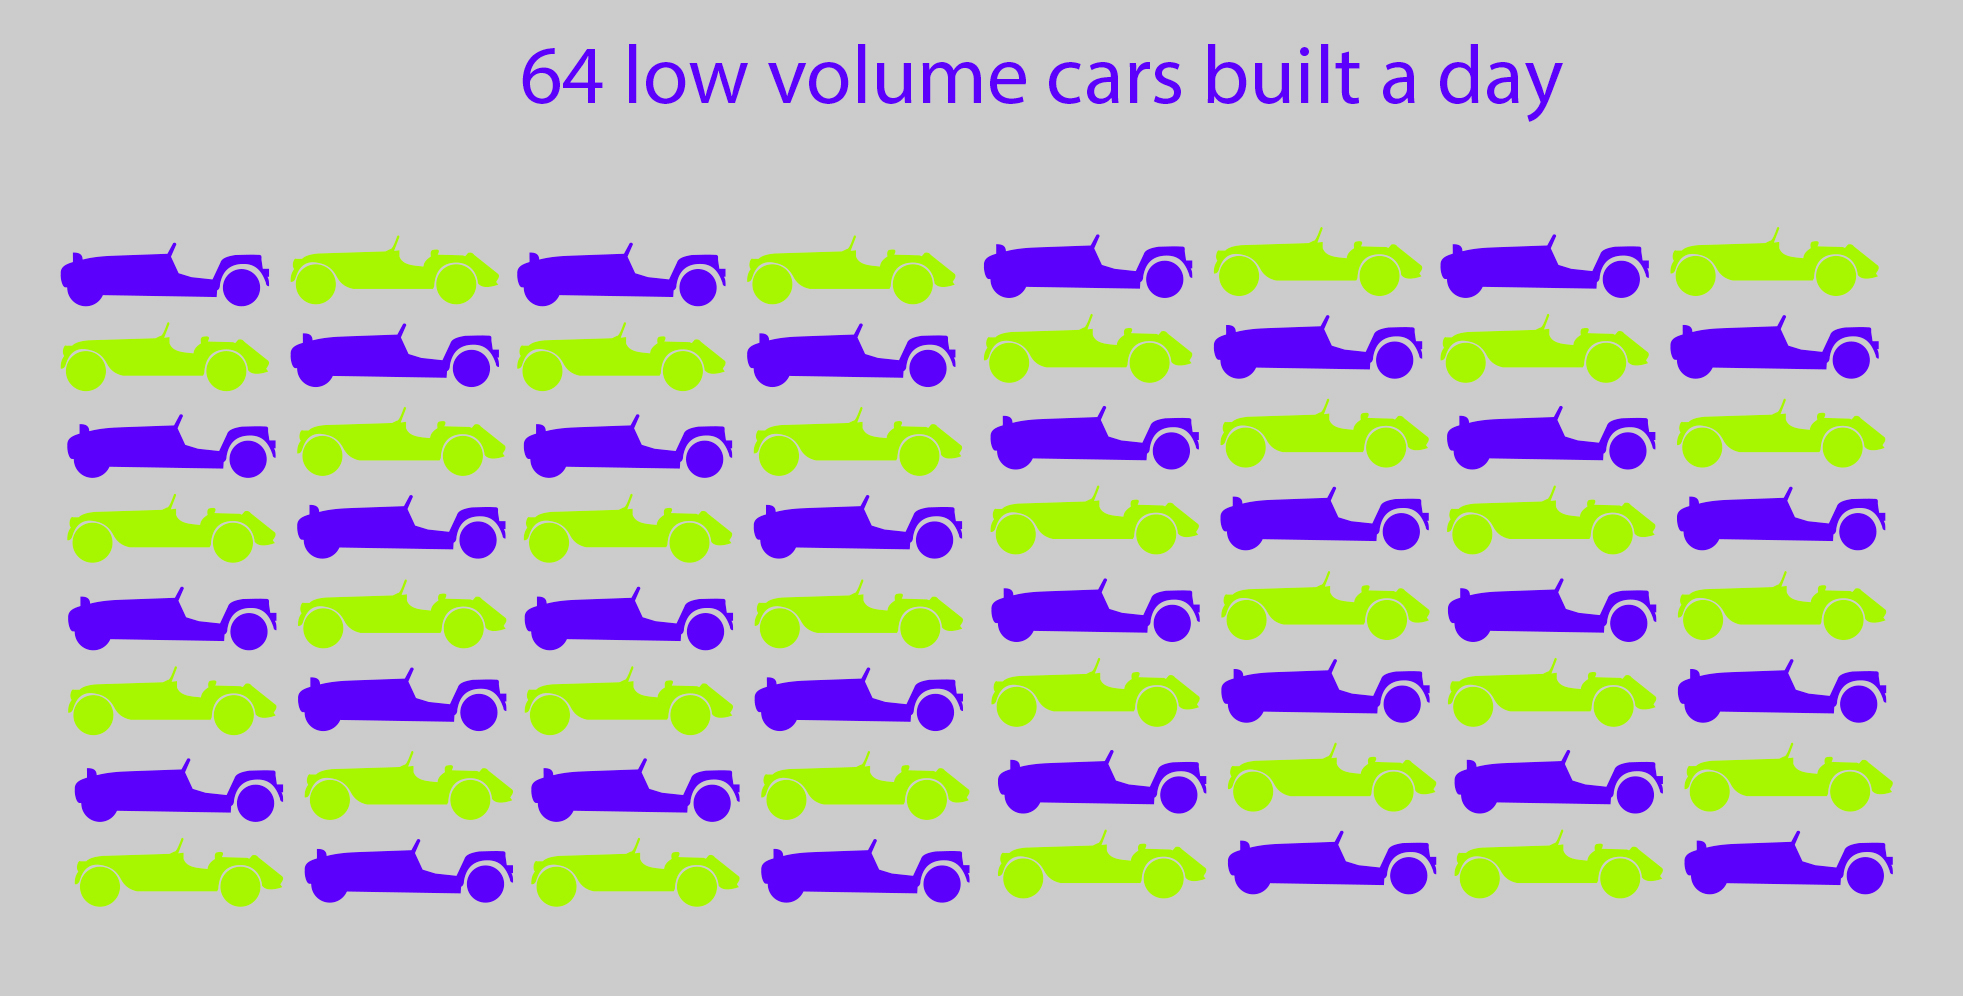 64 cars built a day by low volume manufacturers like Caterham and Morgan